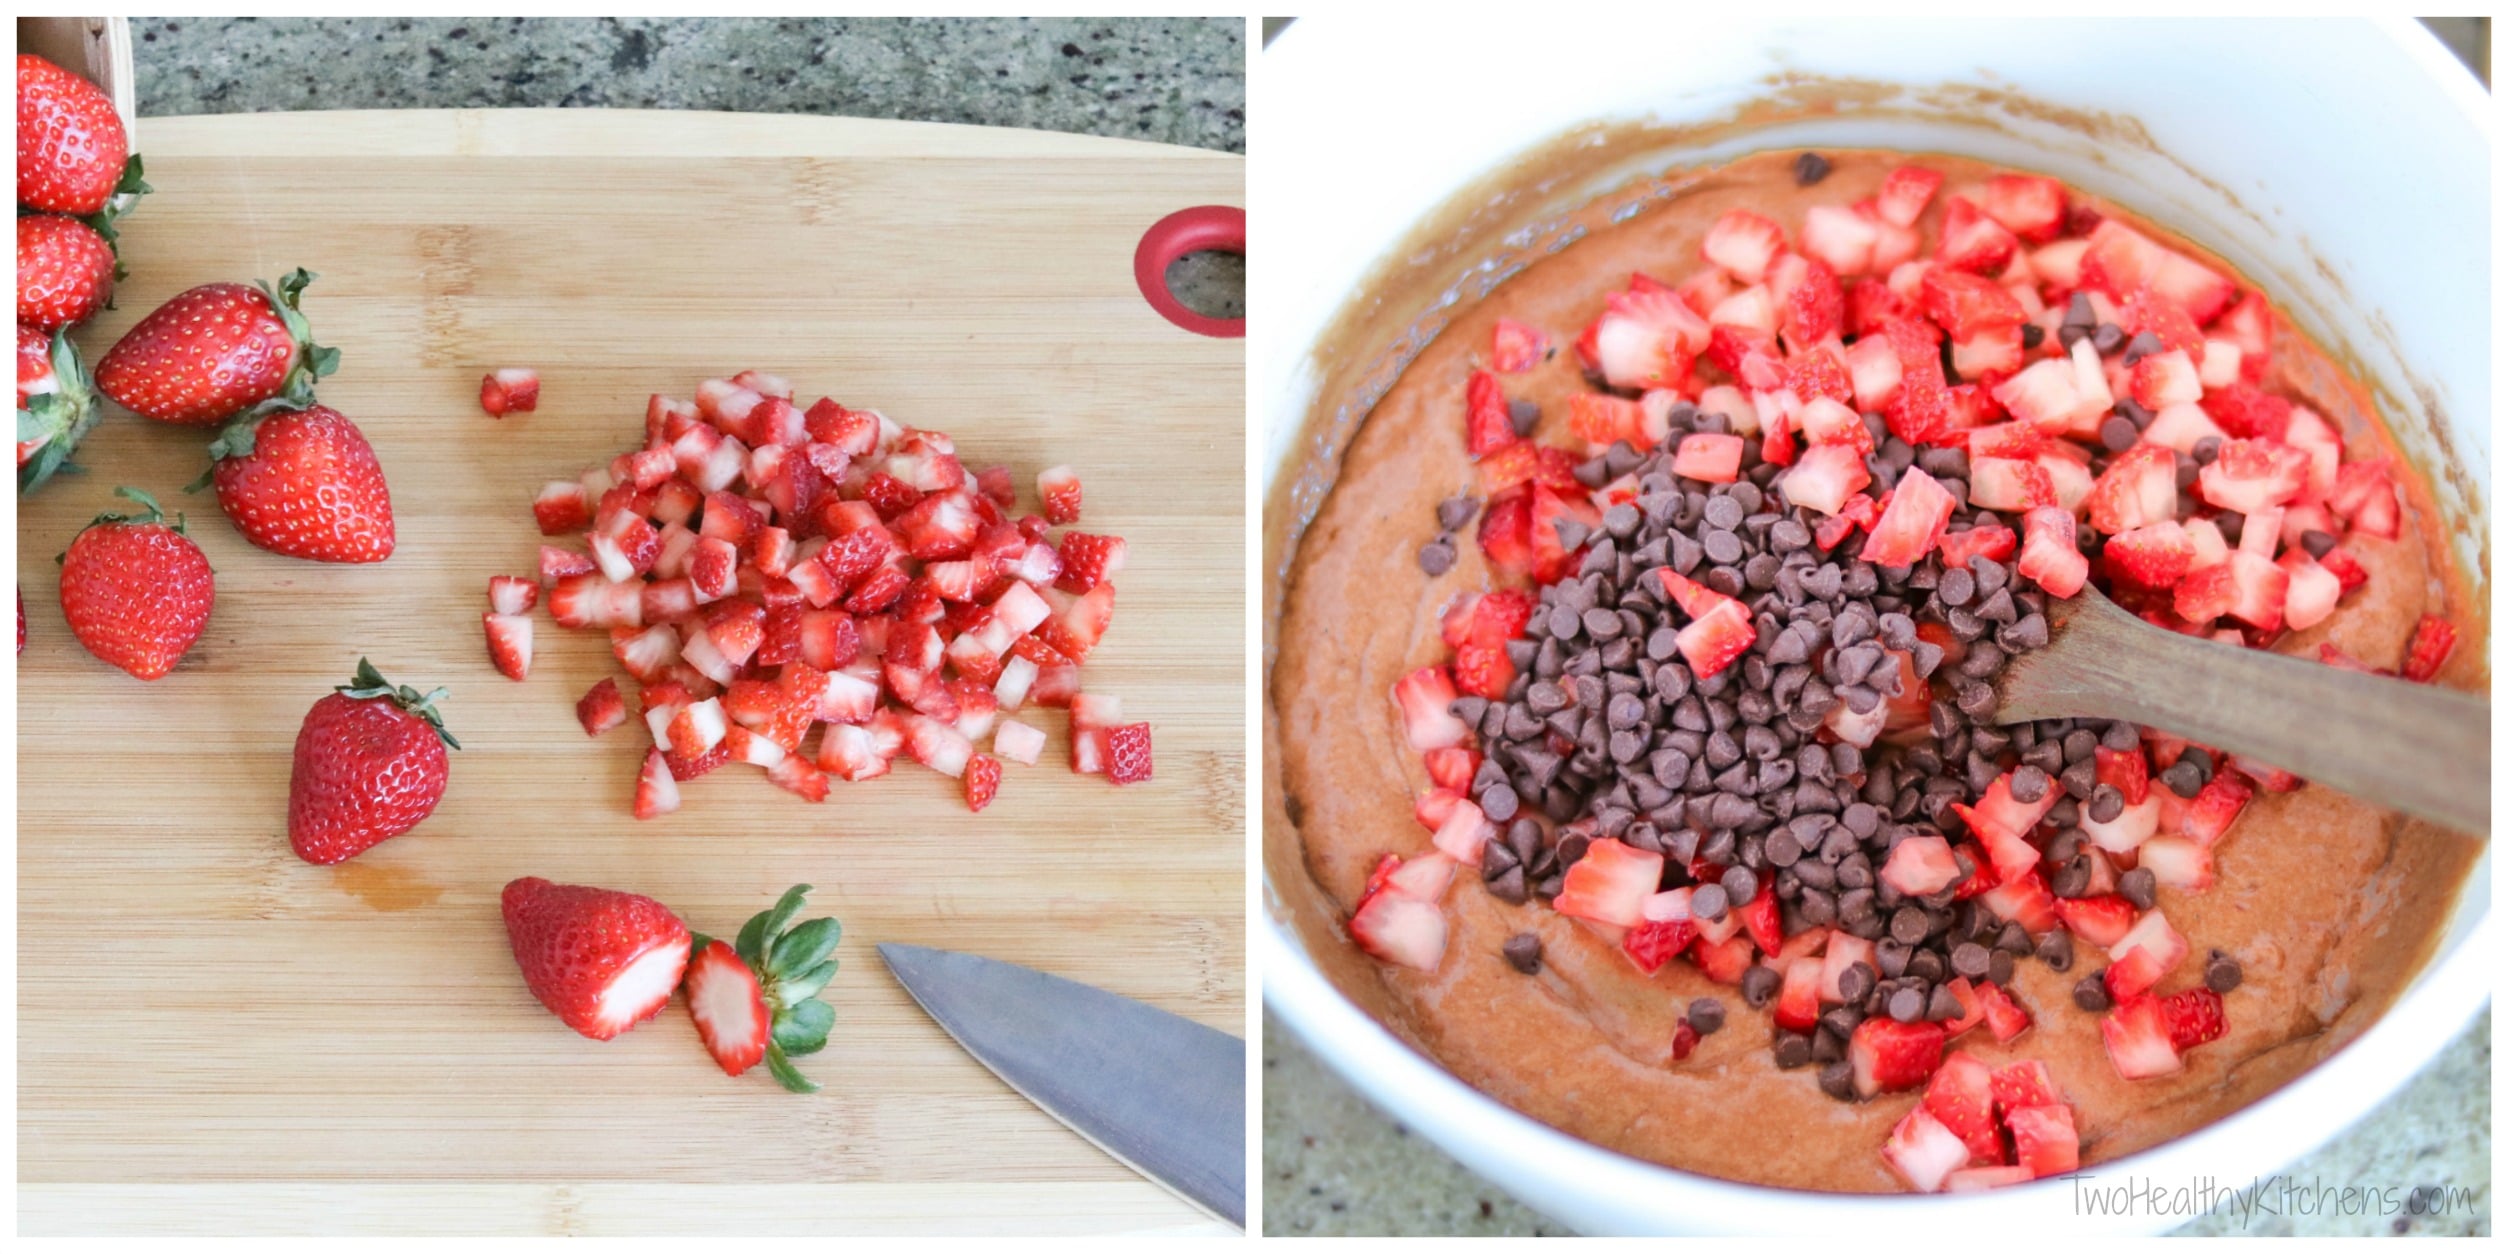 Collage of two photos, first showing how to chop the strawberries, and then of the strawberries and chocolate chips being mixed into the chocolate batter.